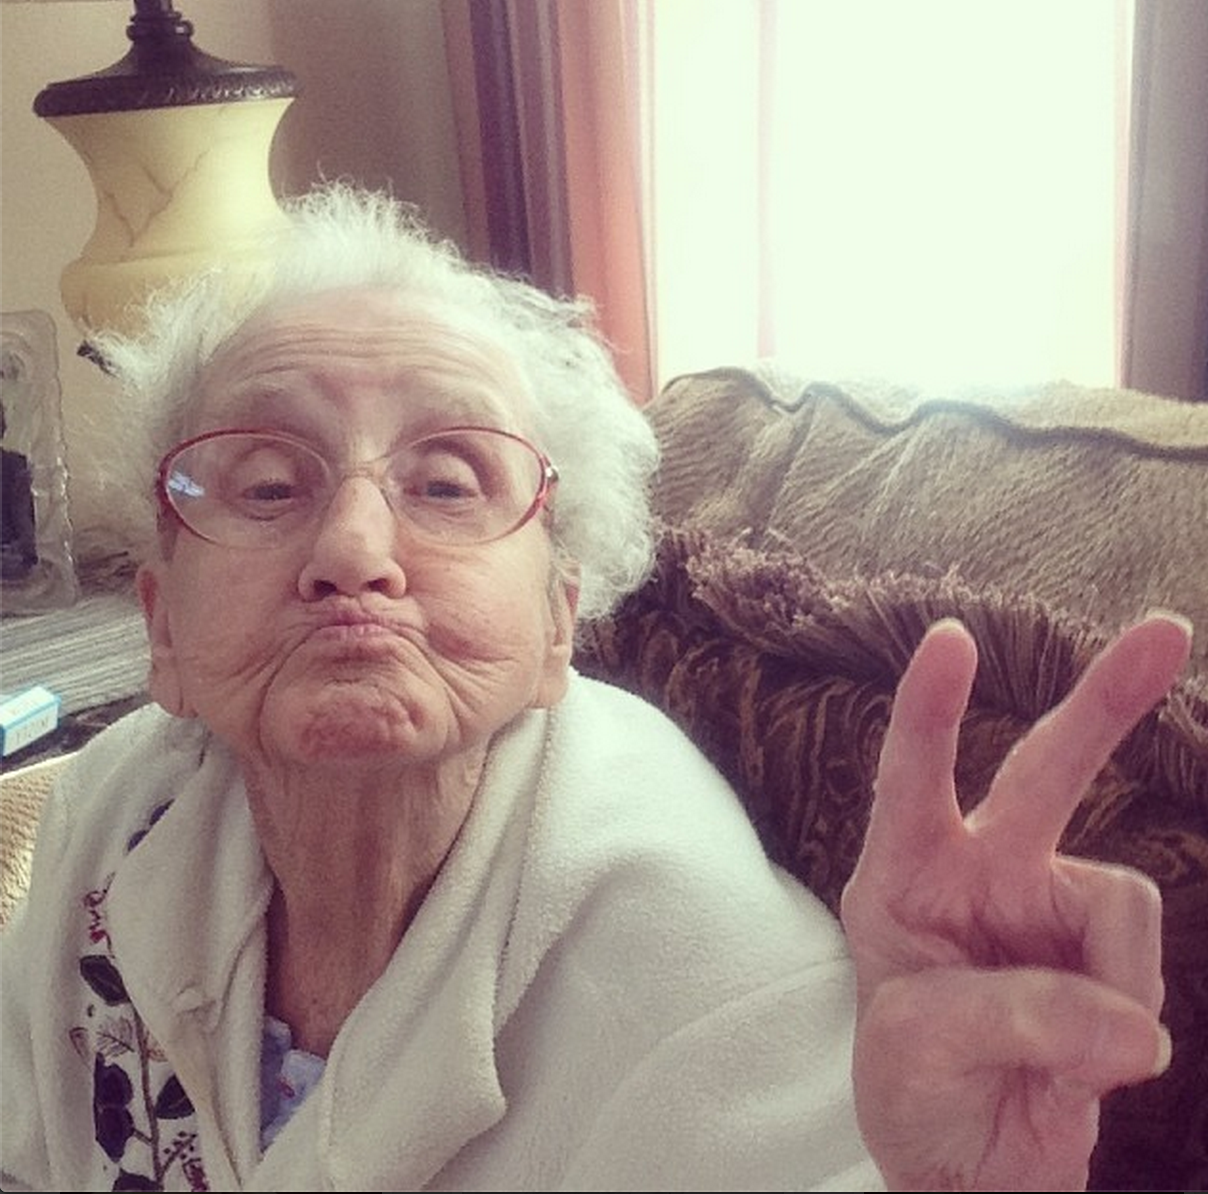 She Changed Us All.... Thank You Grandma Betty - A Real Change | Best selfies, Old people, Photo sharing app